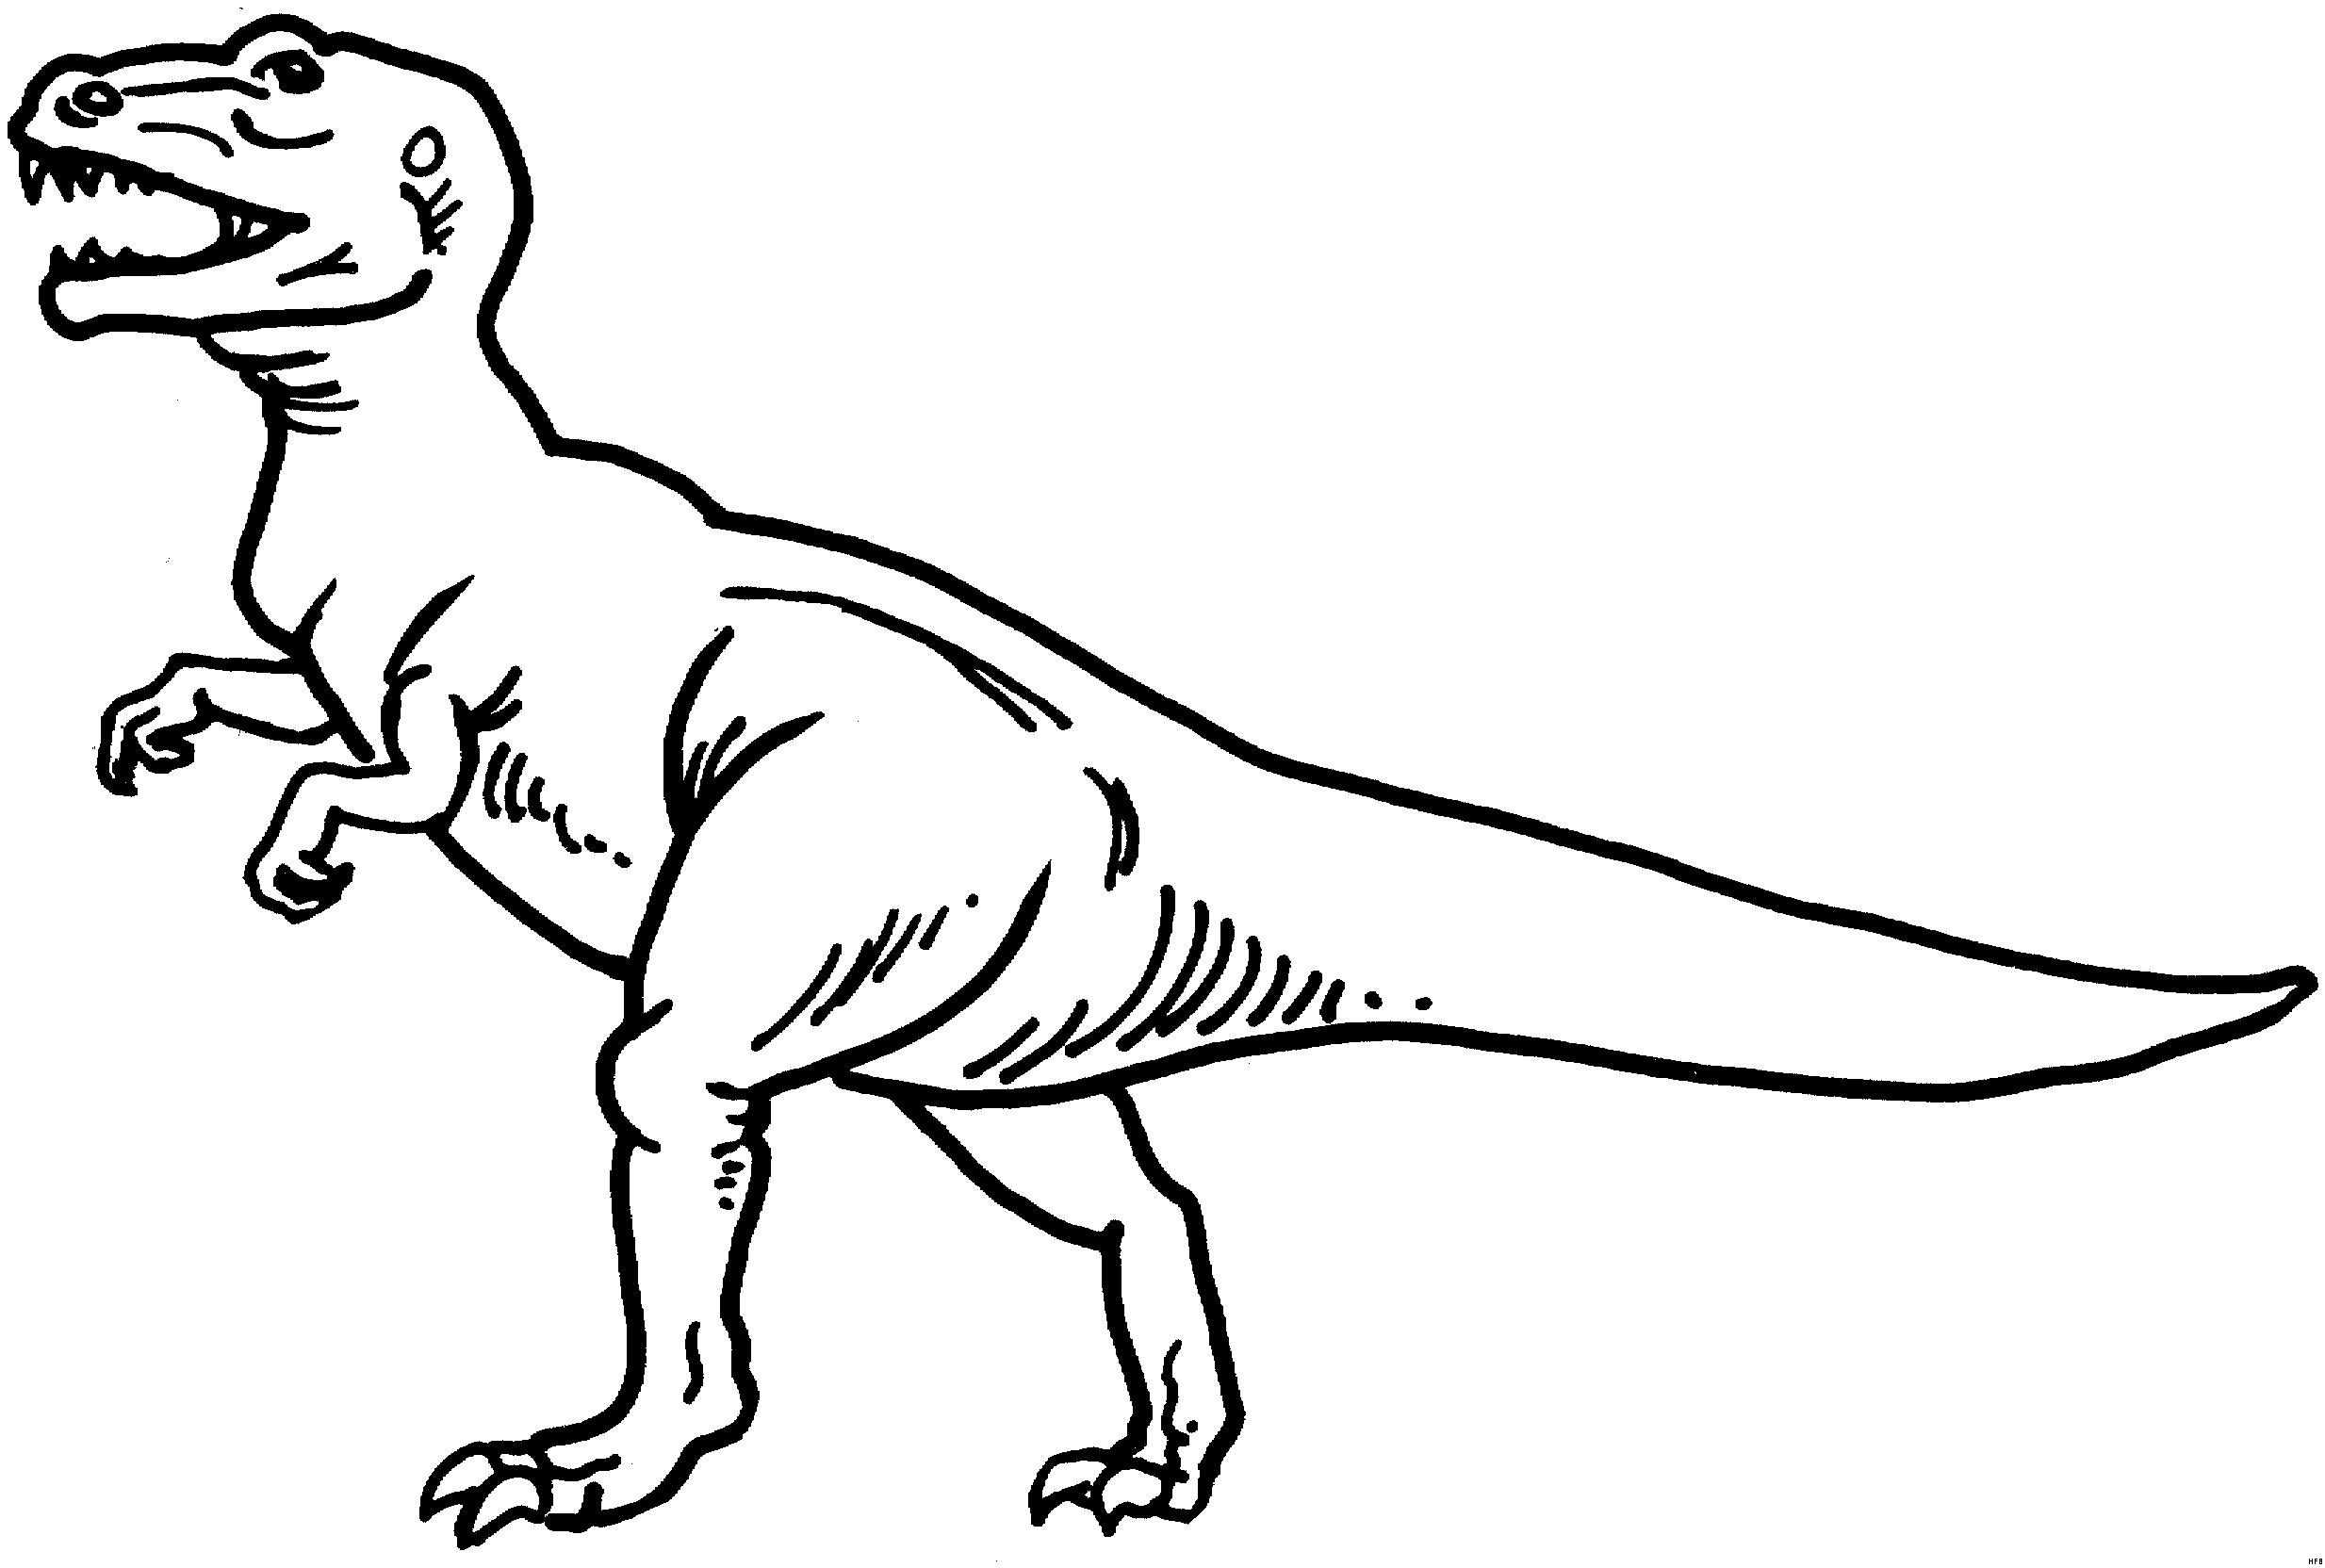 free-dino-download-free-dino-png-images-free-cliparts-on-clipart-library